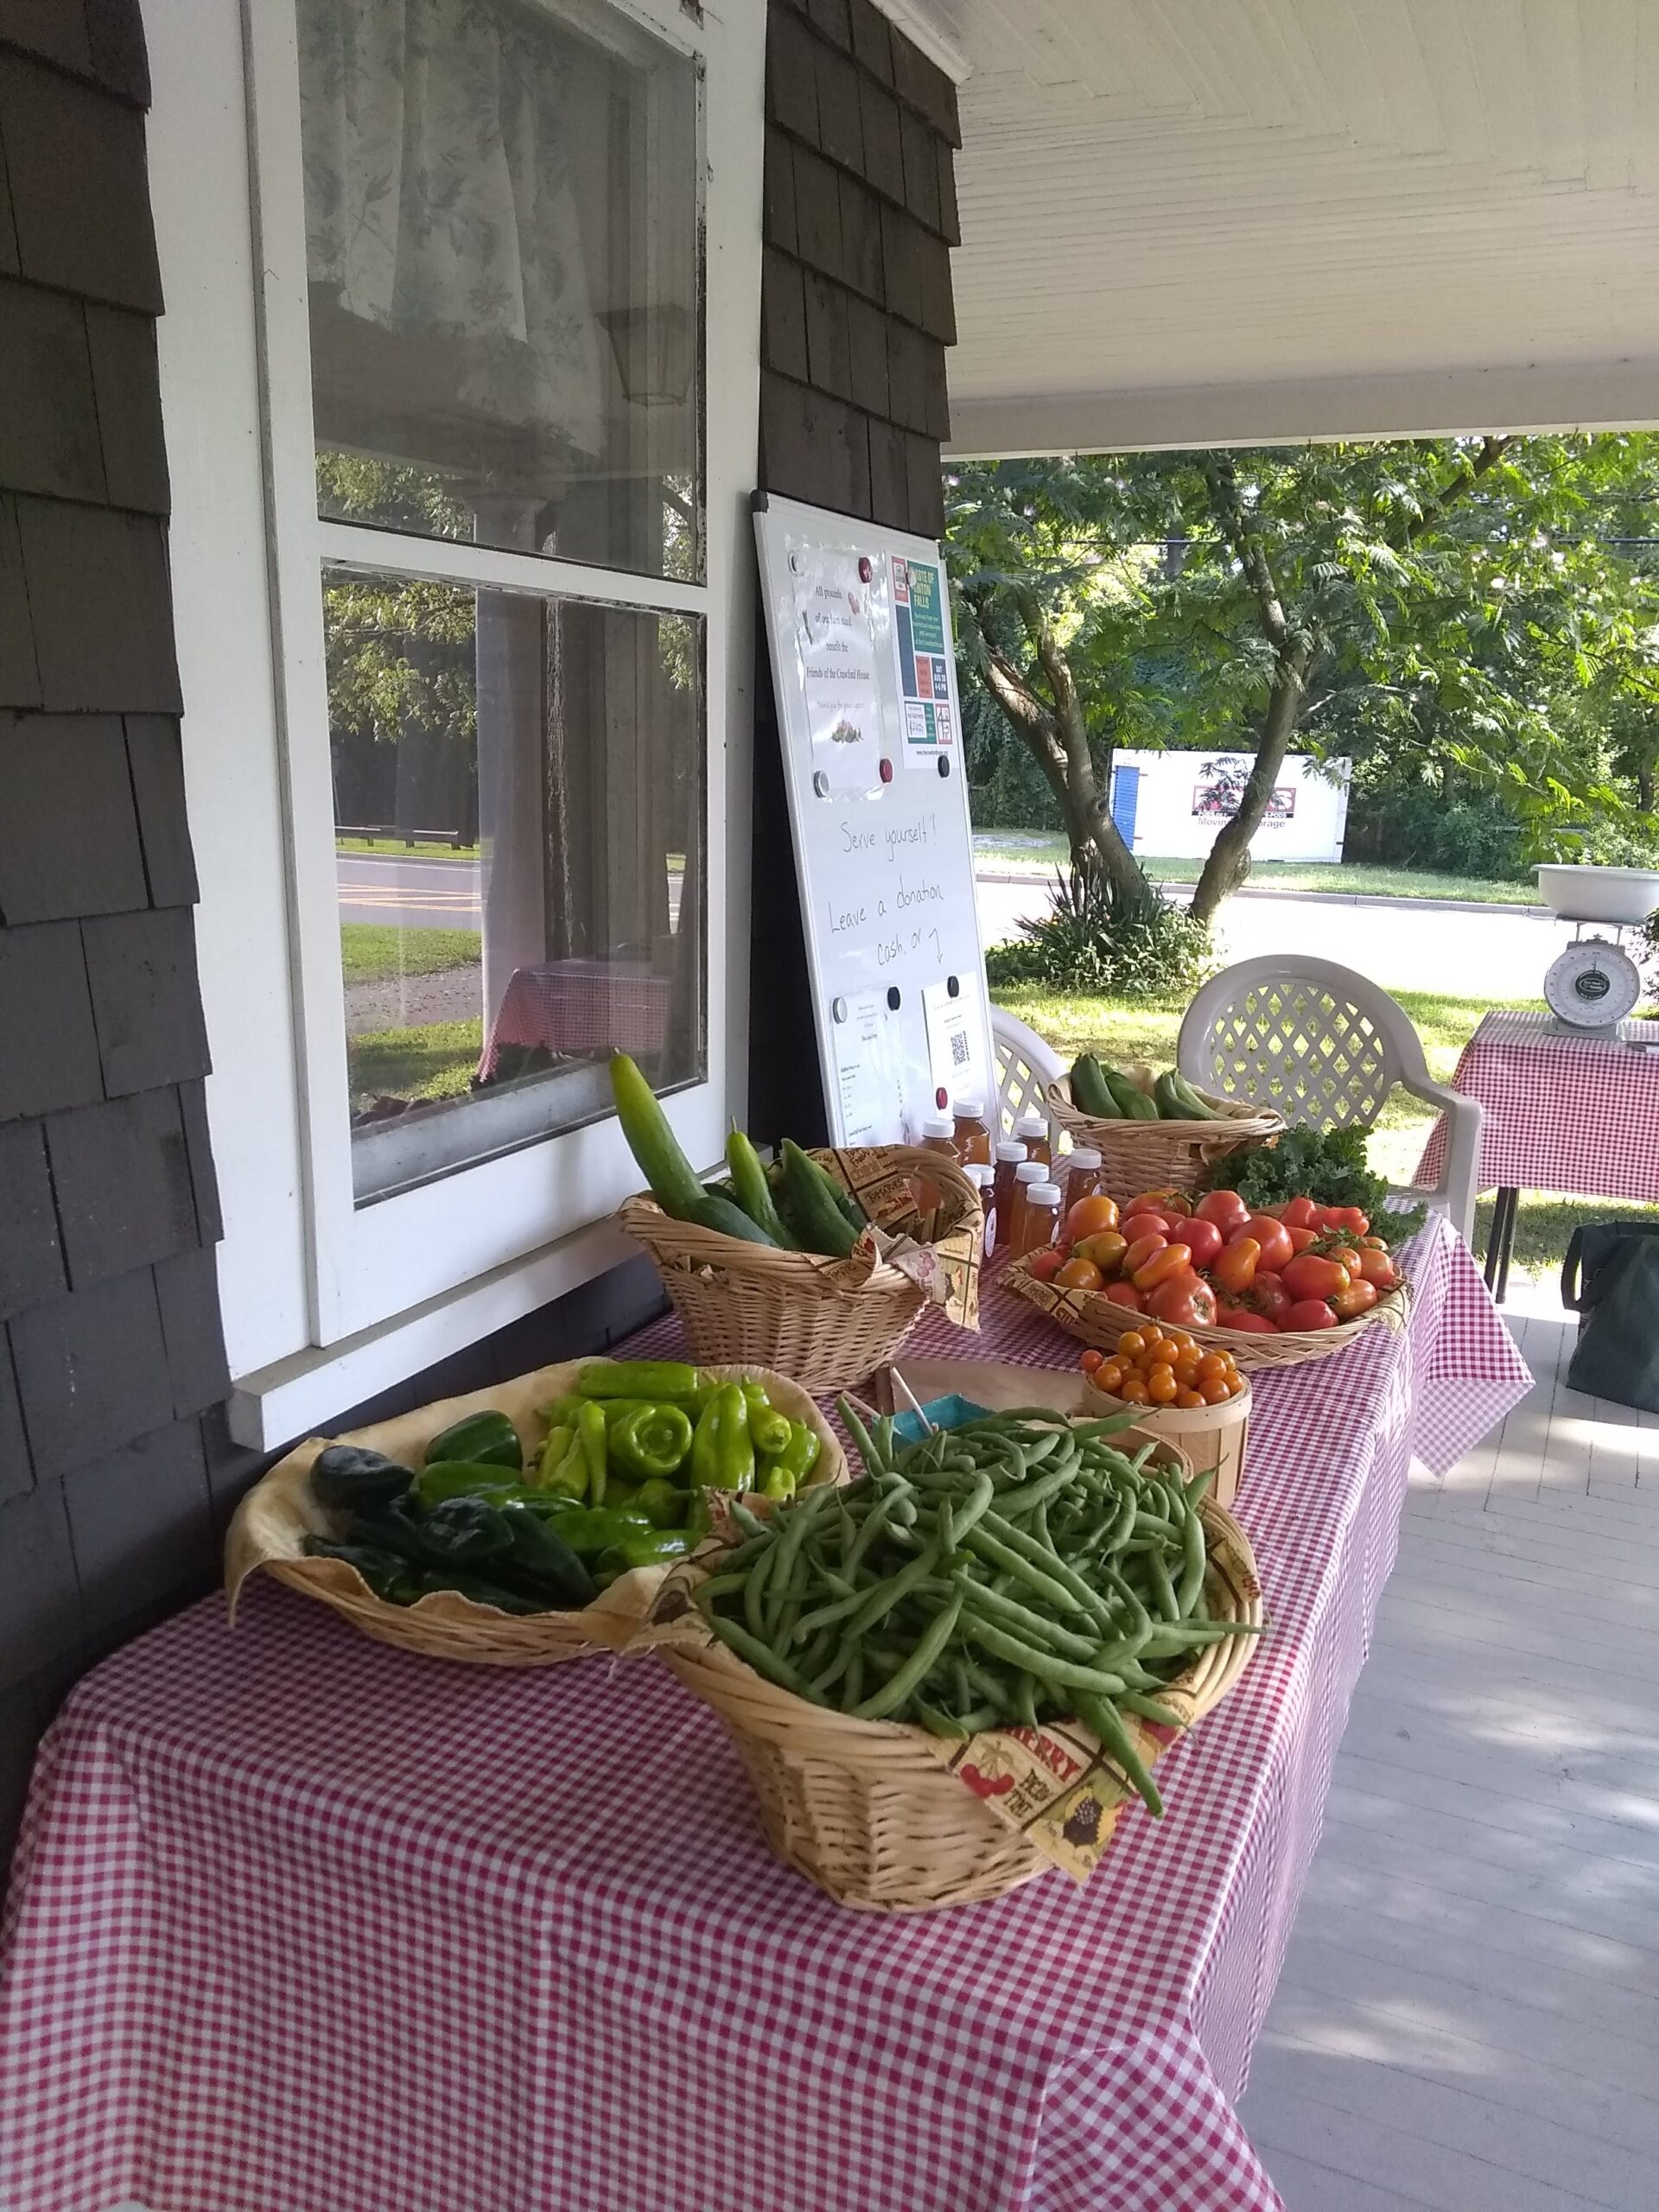 Farm Stand is closed for the season